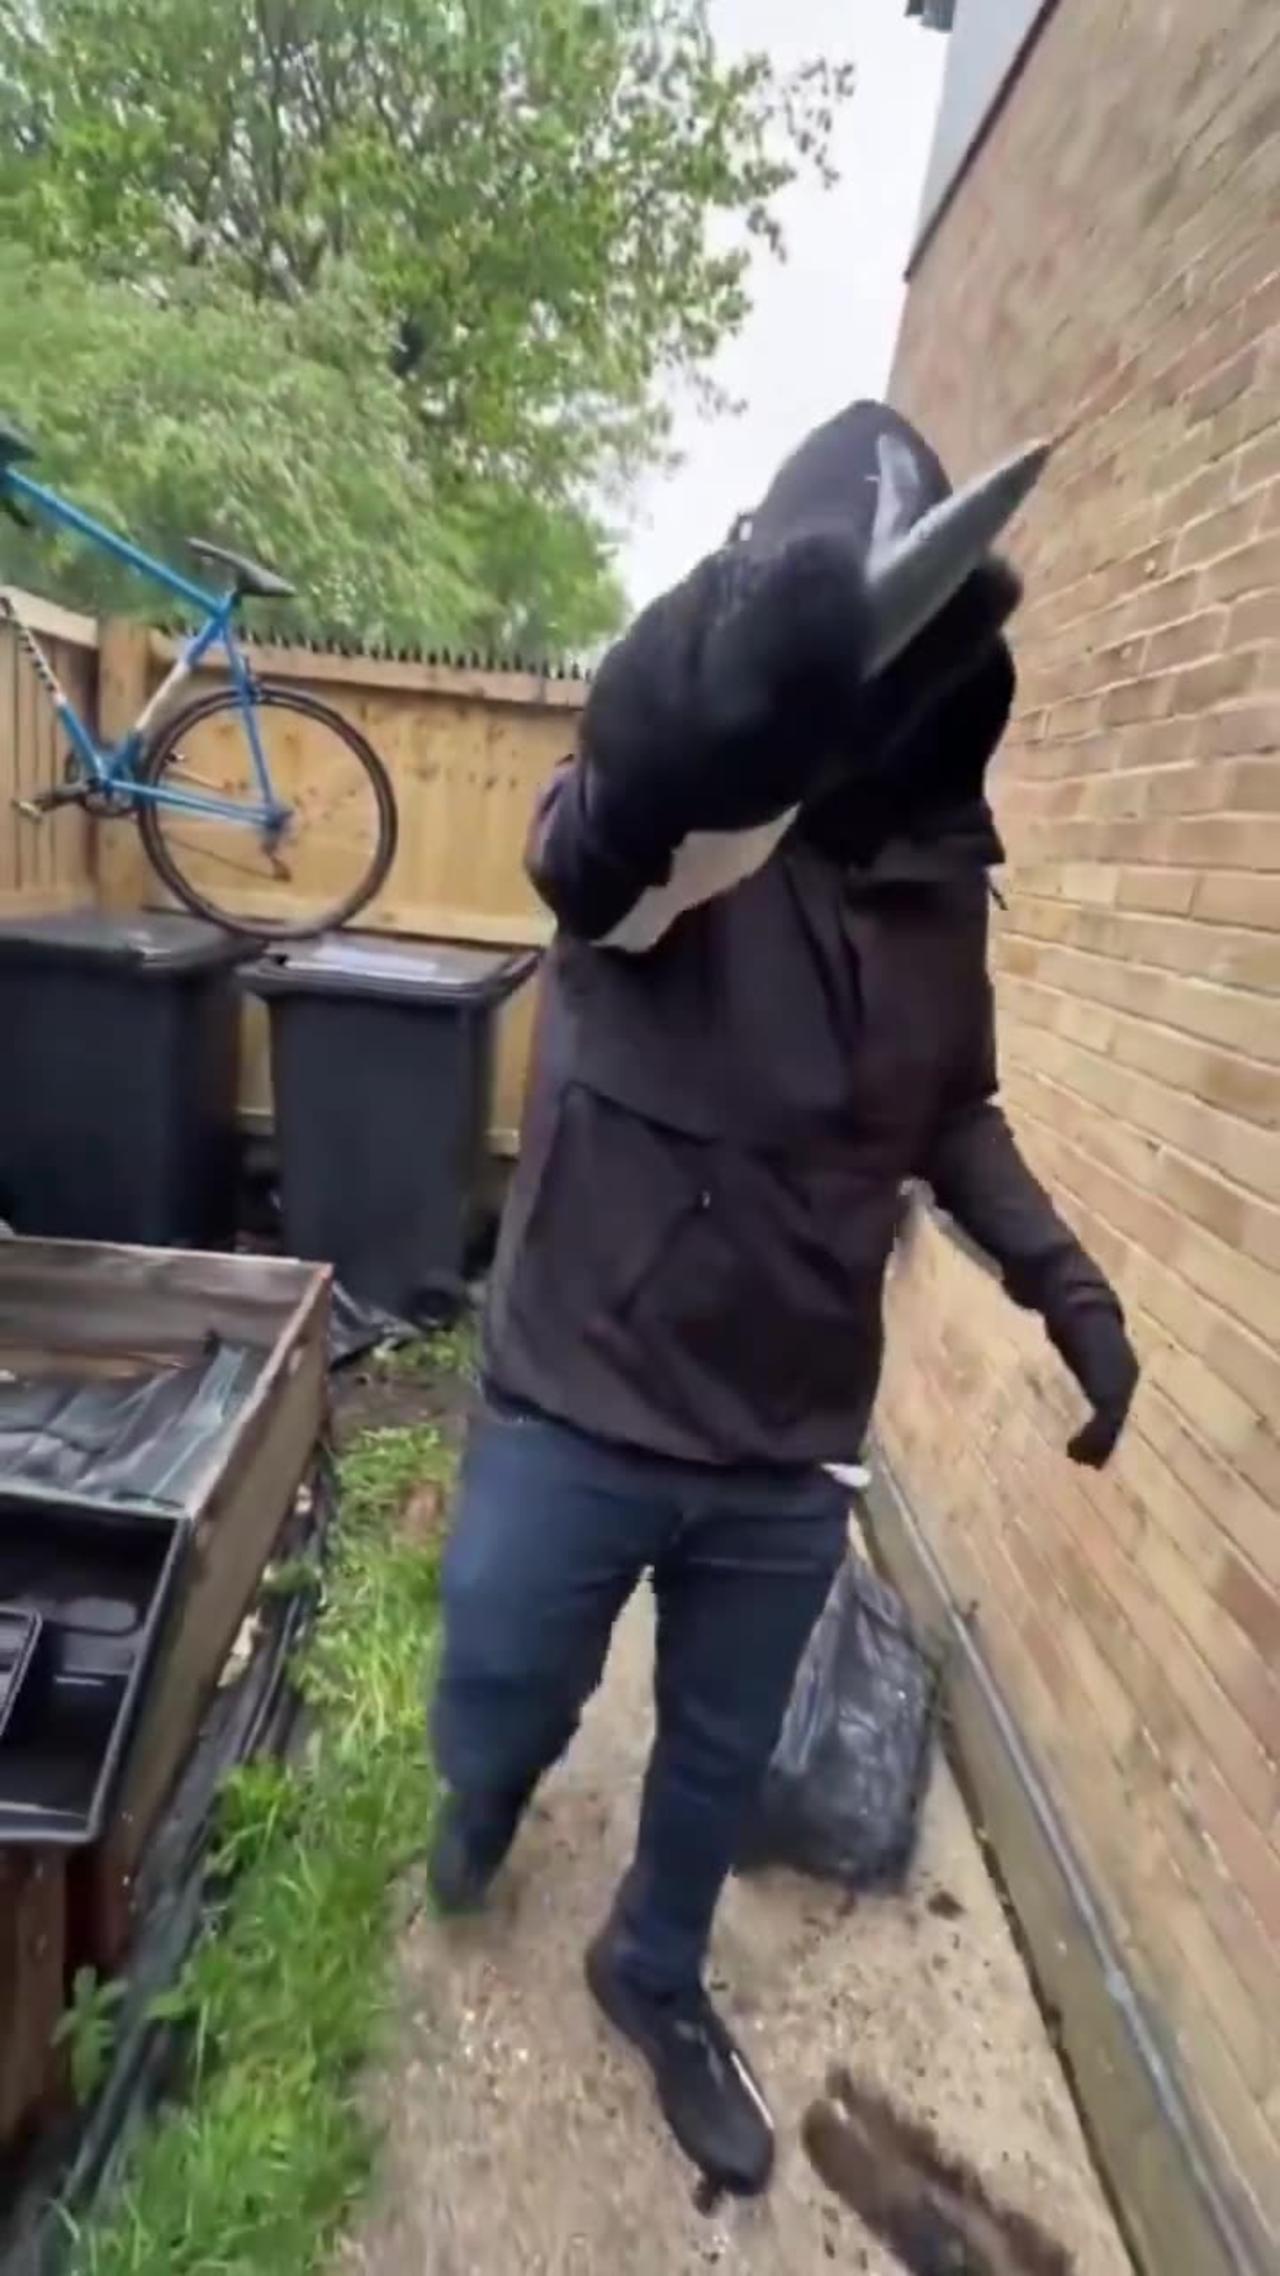 "Man" breaks into a British woman's house to steal her bicycle and threatens